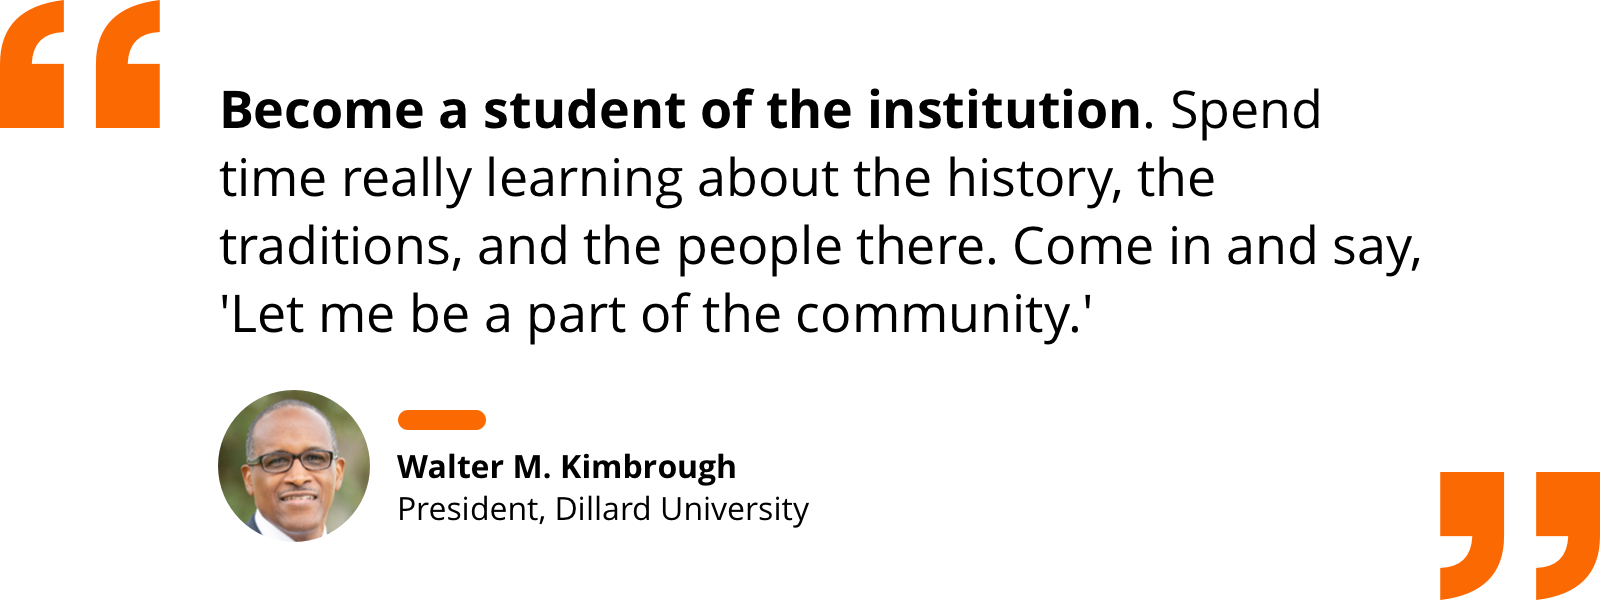 Quote by Walter Kimbrough re: engaging with the institution by becoming a student of its history and culture.